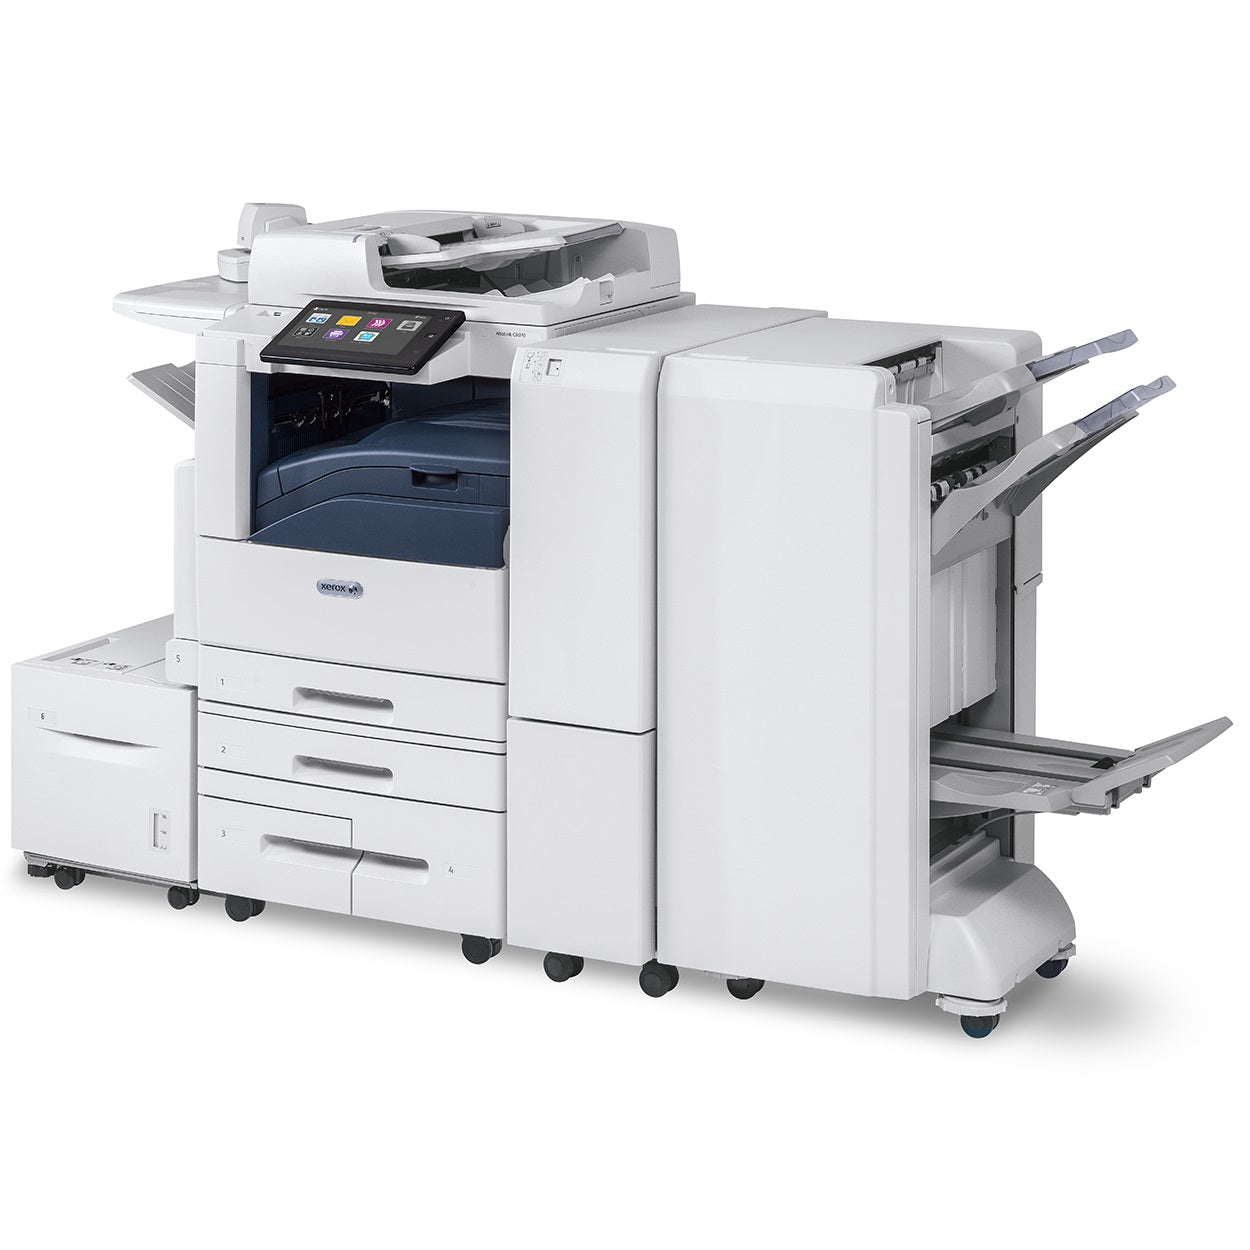 Xerox Altalink C8055 High-Speed Color Multifunction Photocopier Printer Scanner, 11x17, 12x18 With Built-in Mobile Connectivity